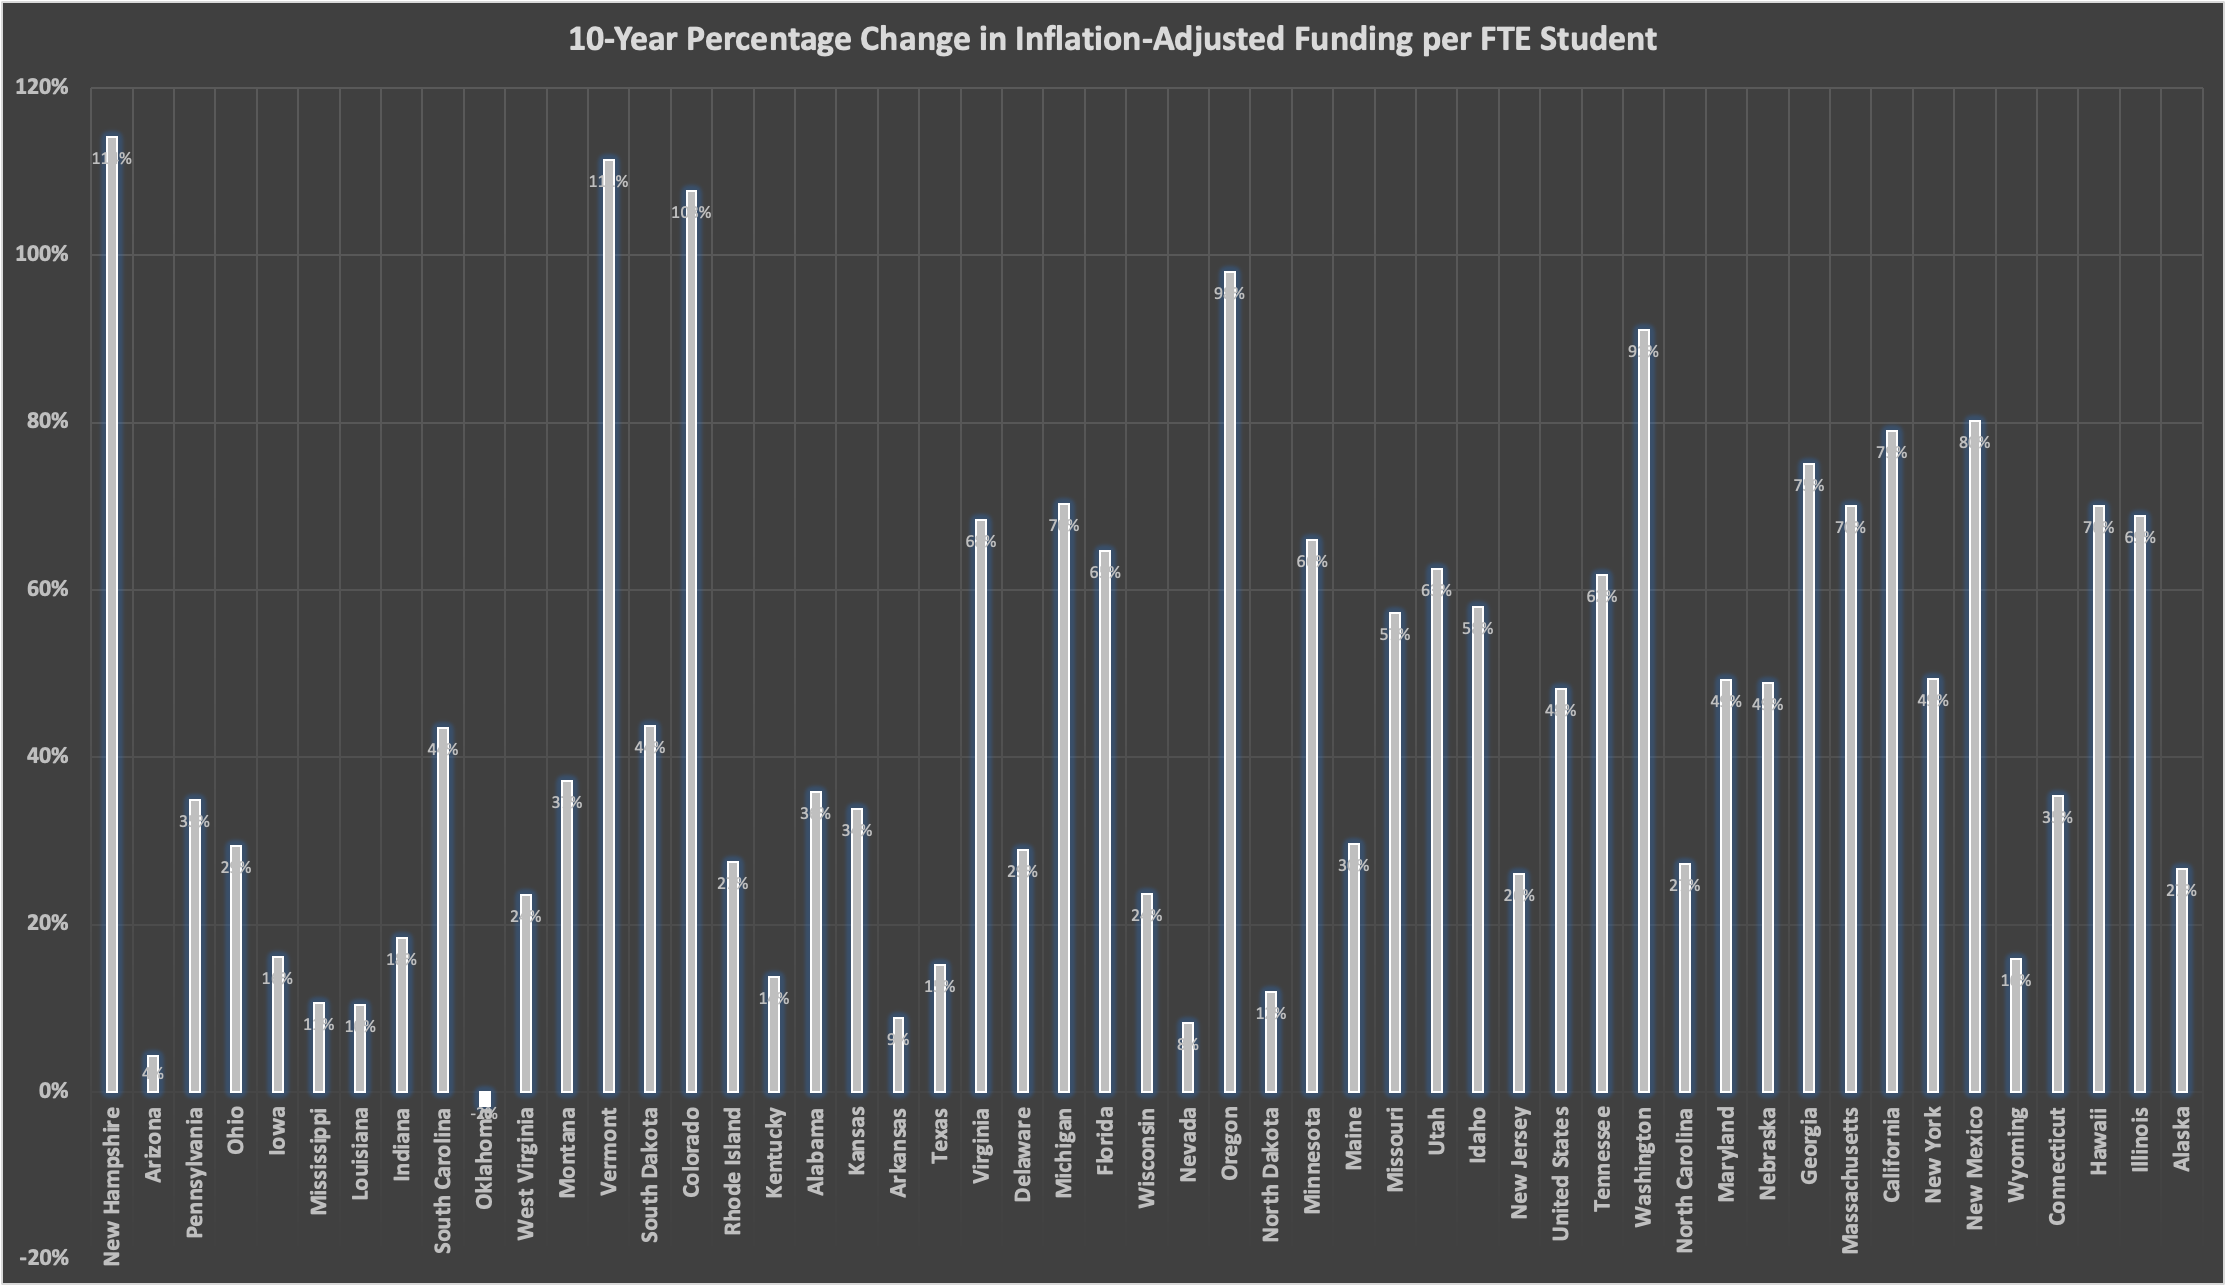 10-Year Percentage Change in Inflation-Adjusted Funding per Full-Time Equivalent (FTE) Student 